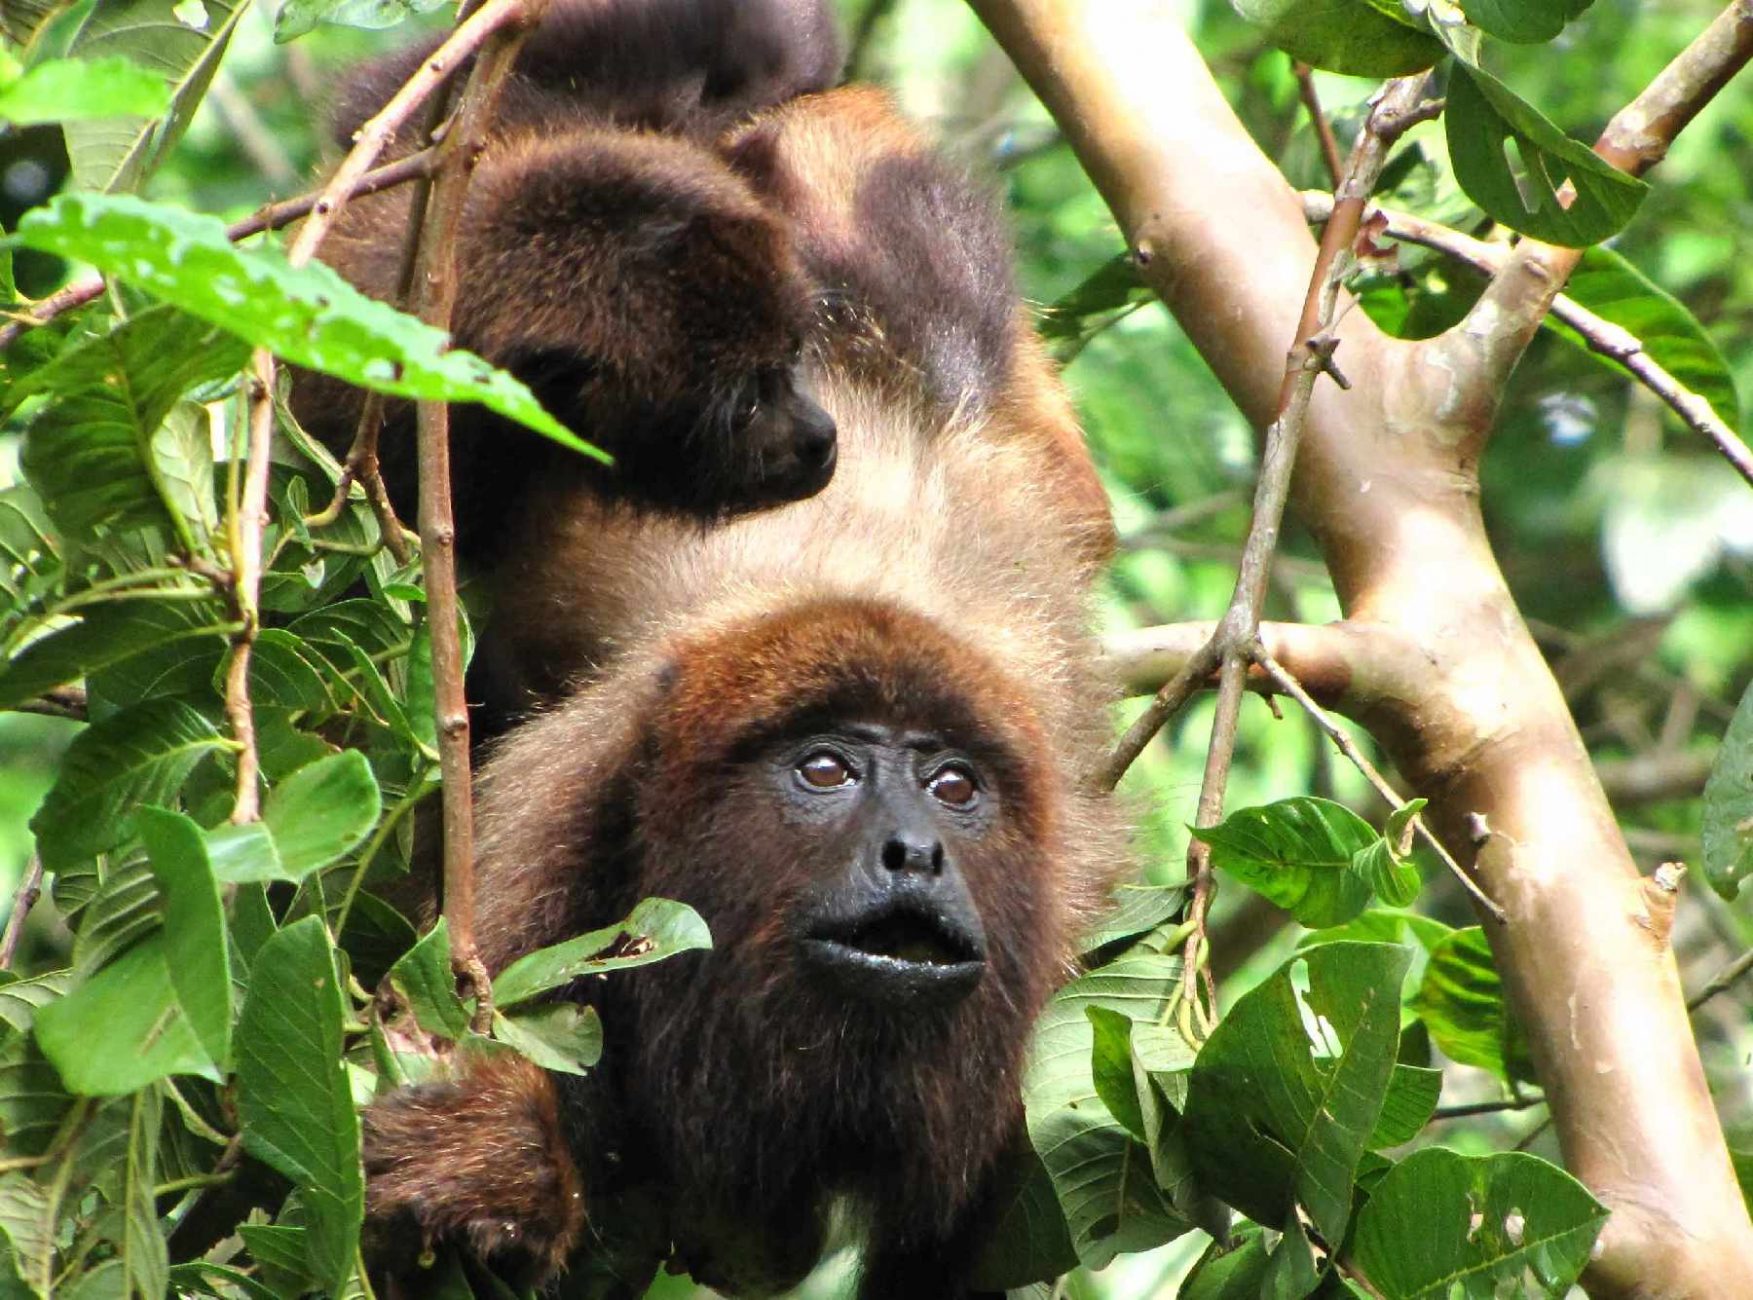 Hundreds of howler monkeys have been killed by the yellow fever virus. Credit: Carla Possamai, Muriqui Project of Caratinga